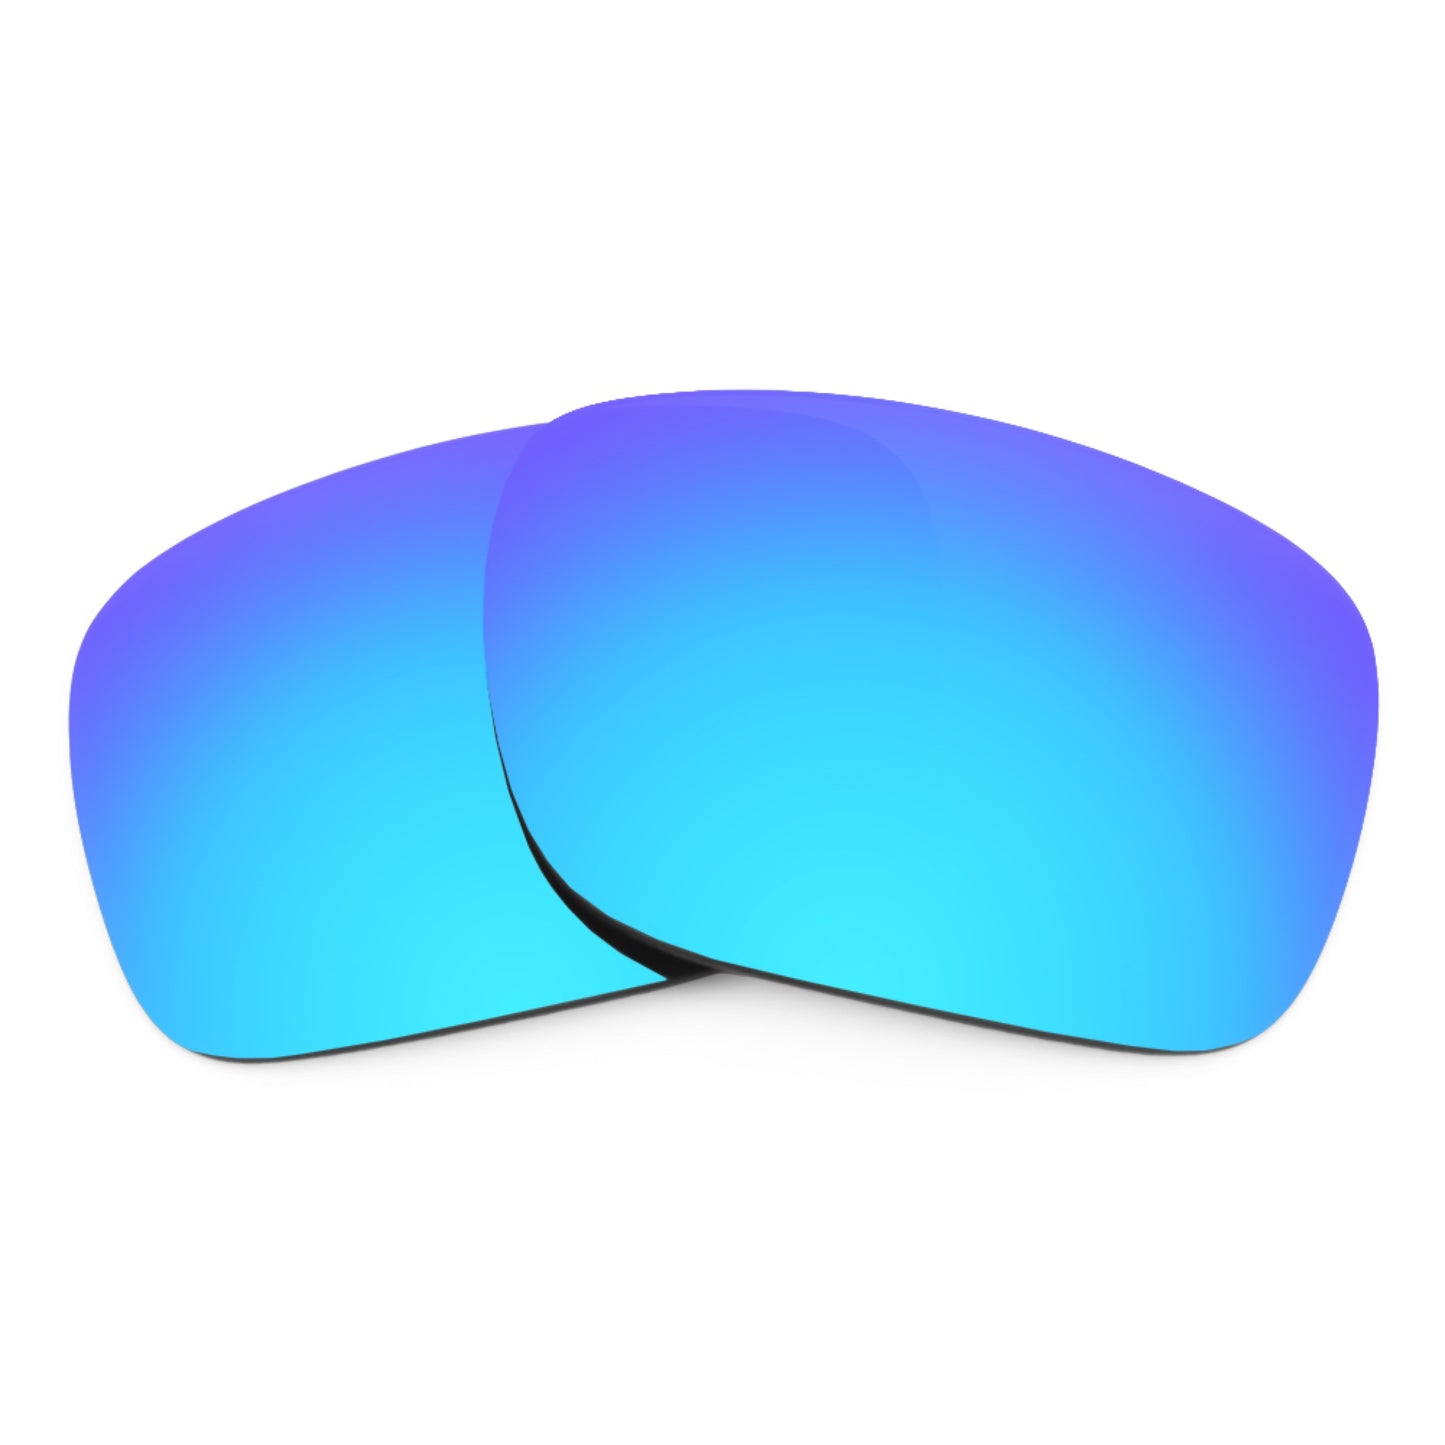 Revant replacement lenses for Ray-Ban Drifter (B&L) 56mm Elite Polarized Ice Blue